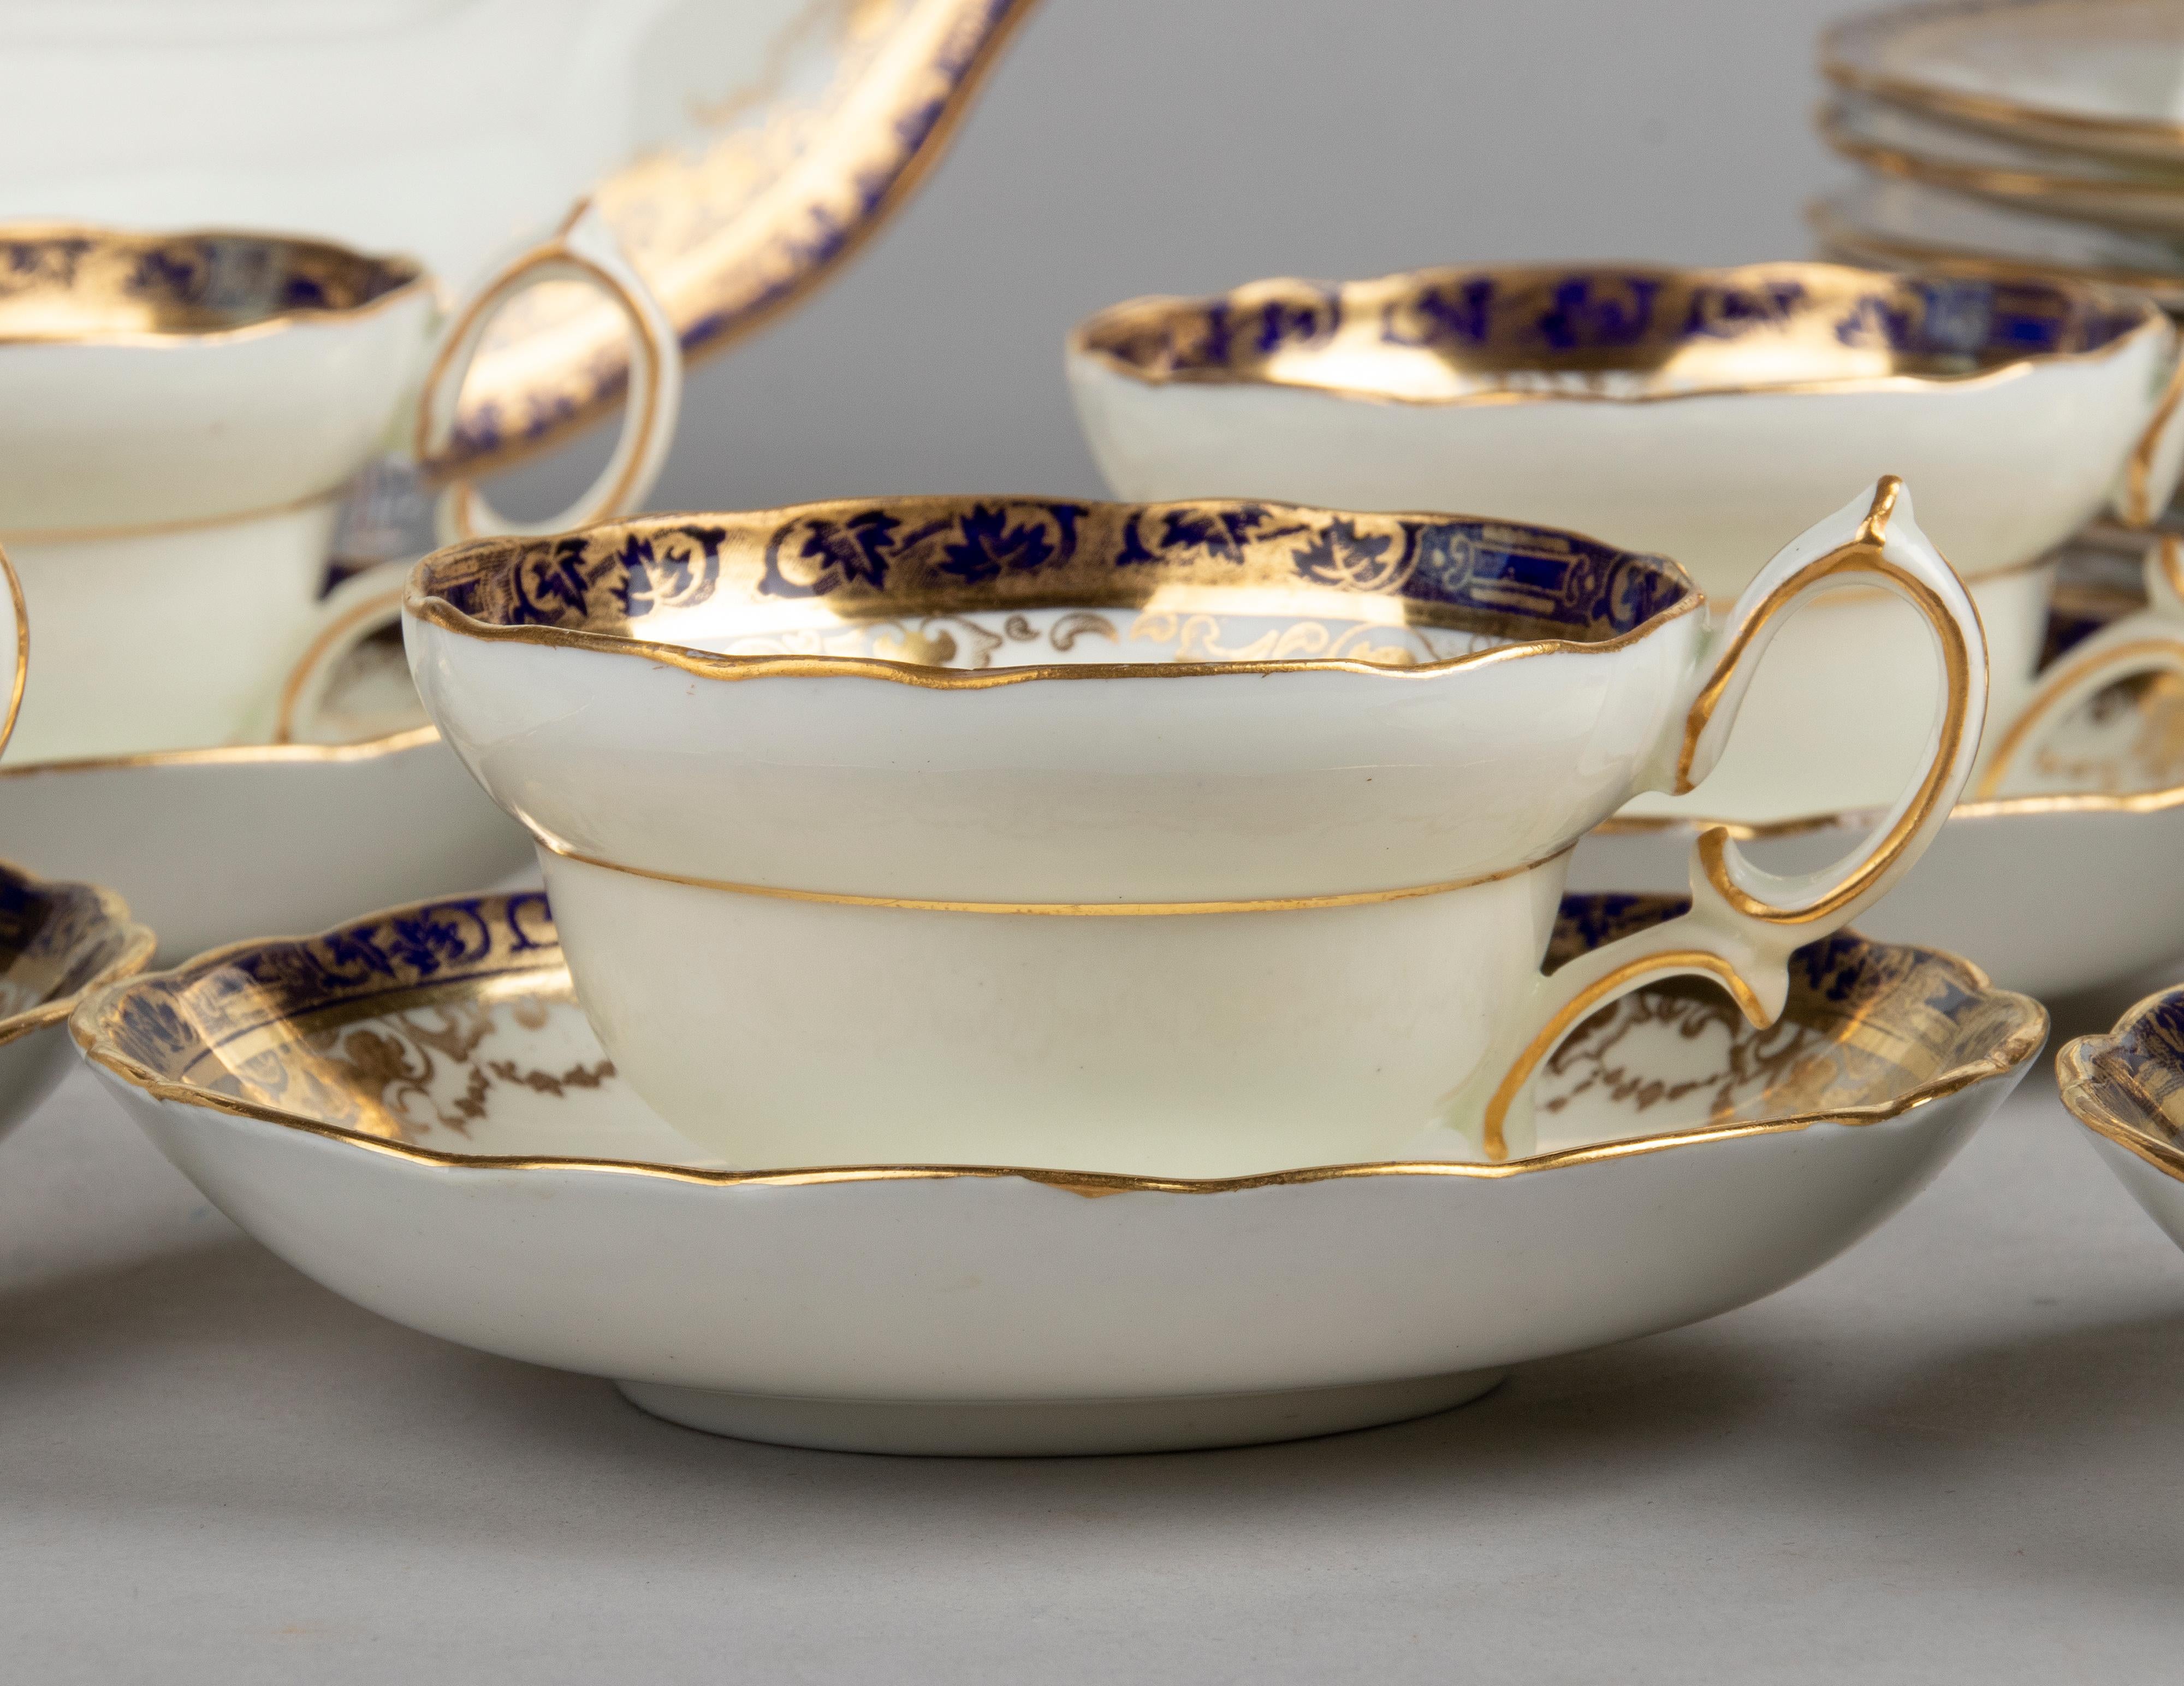 Early 20th Century English Porcelain Tea Set Made by Hammerley 2